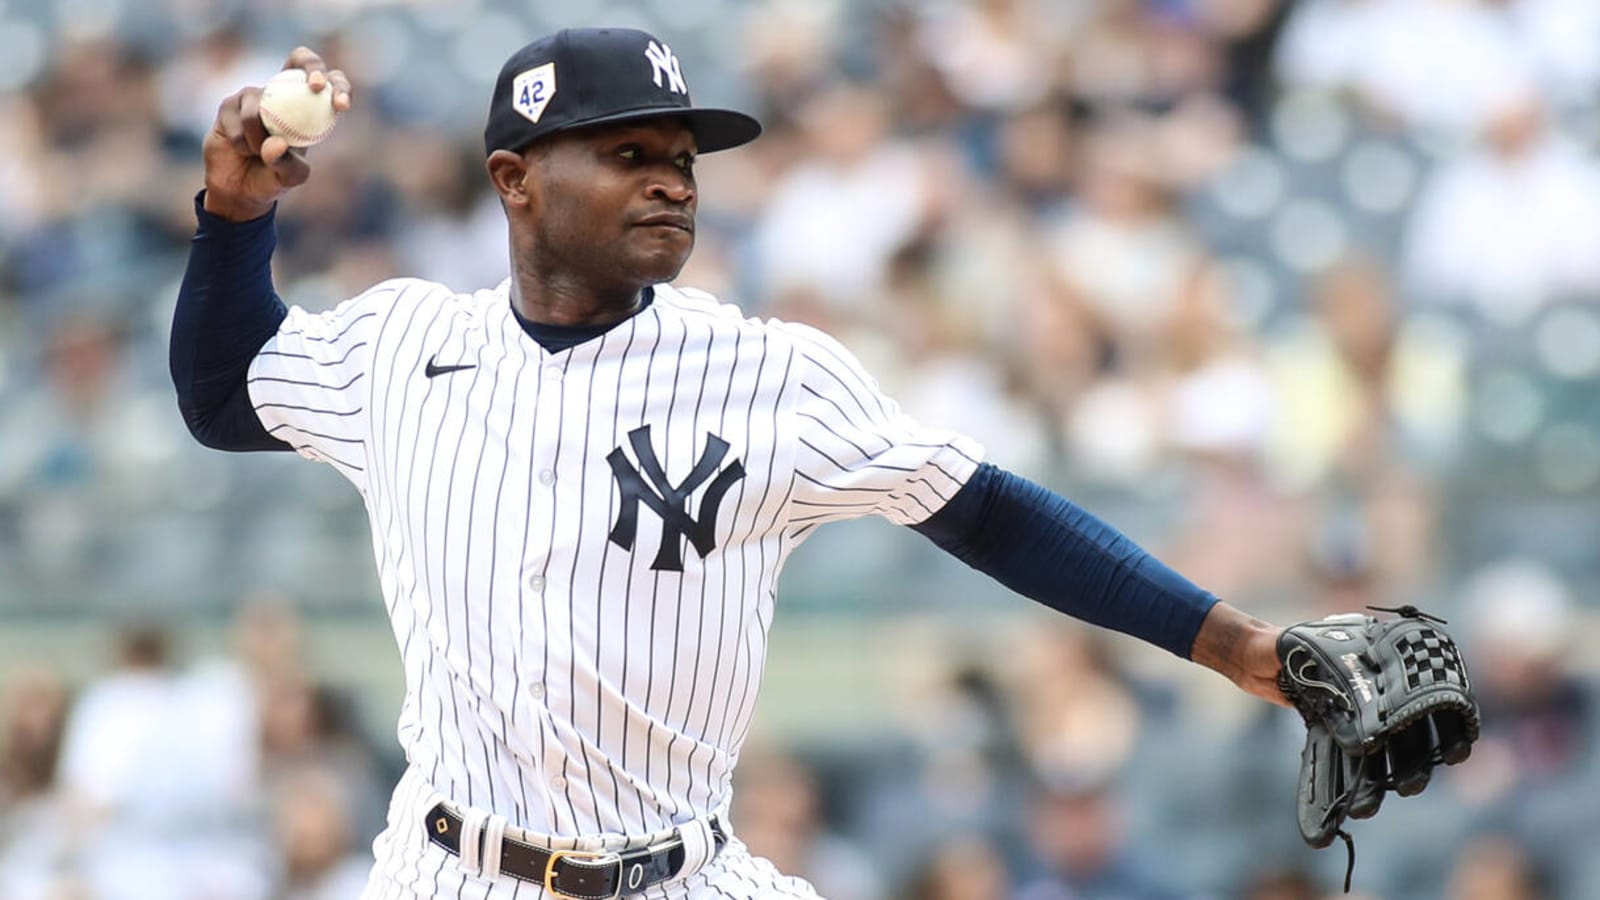 Yankees pitcher accused of cheating during career performance